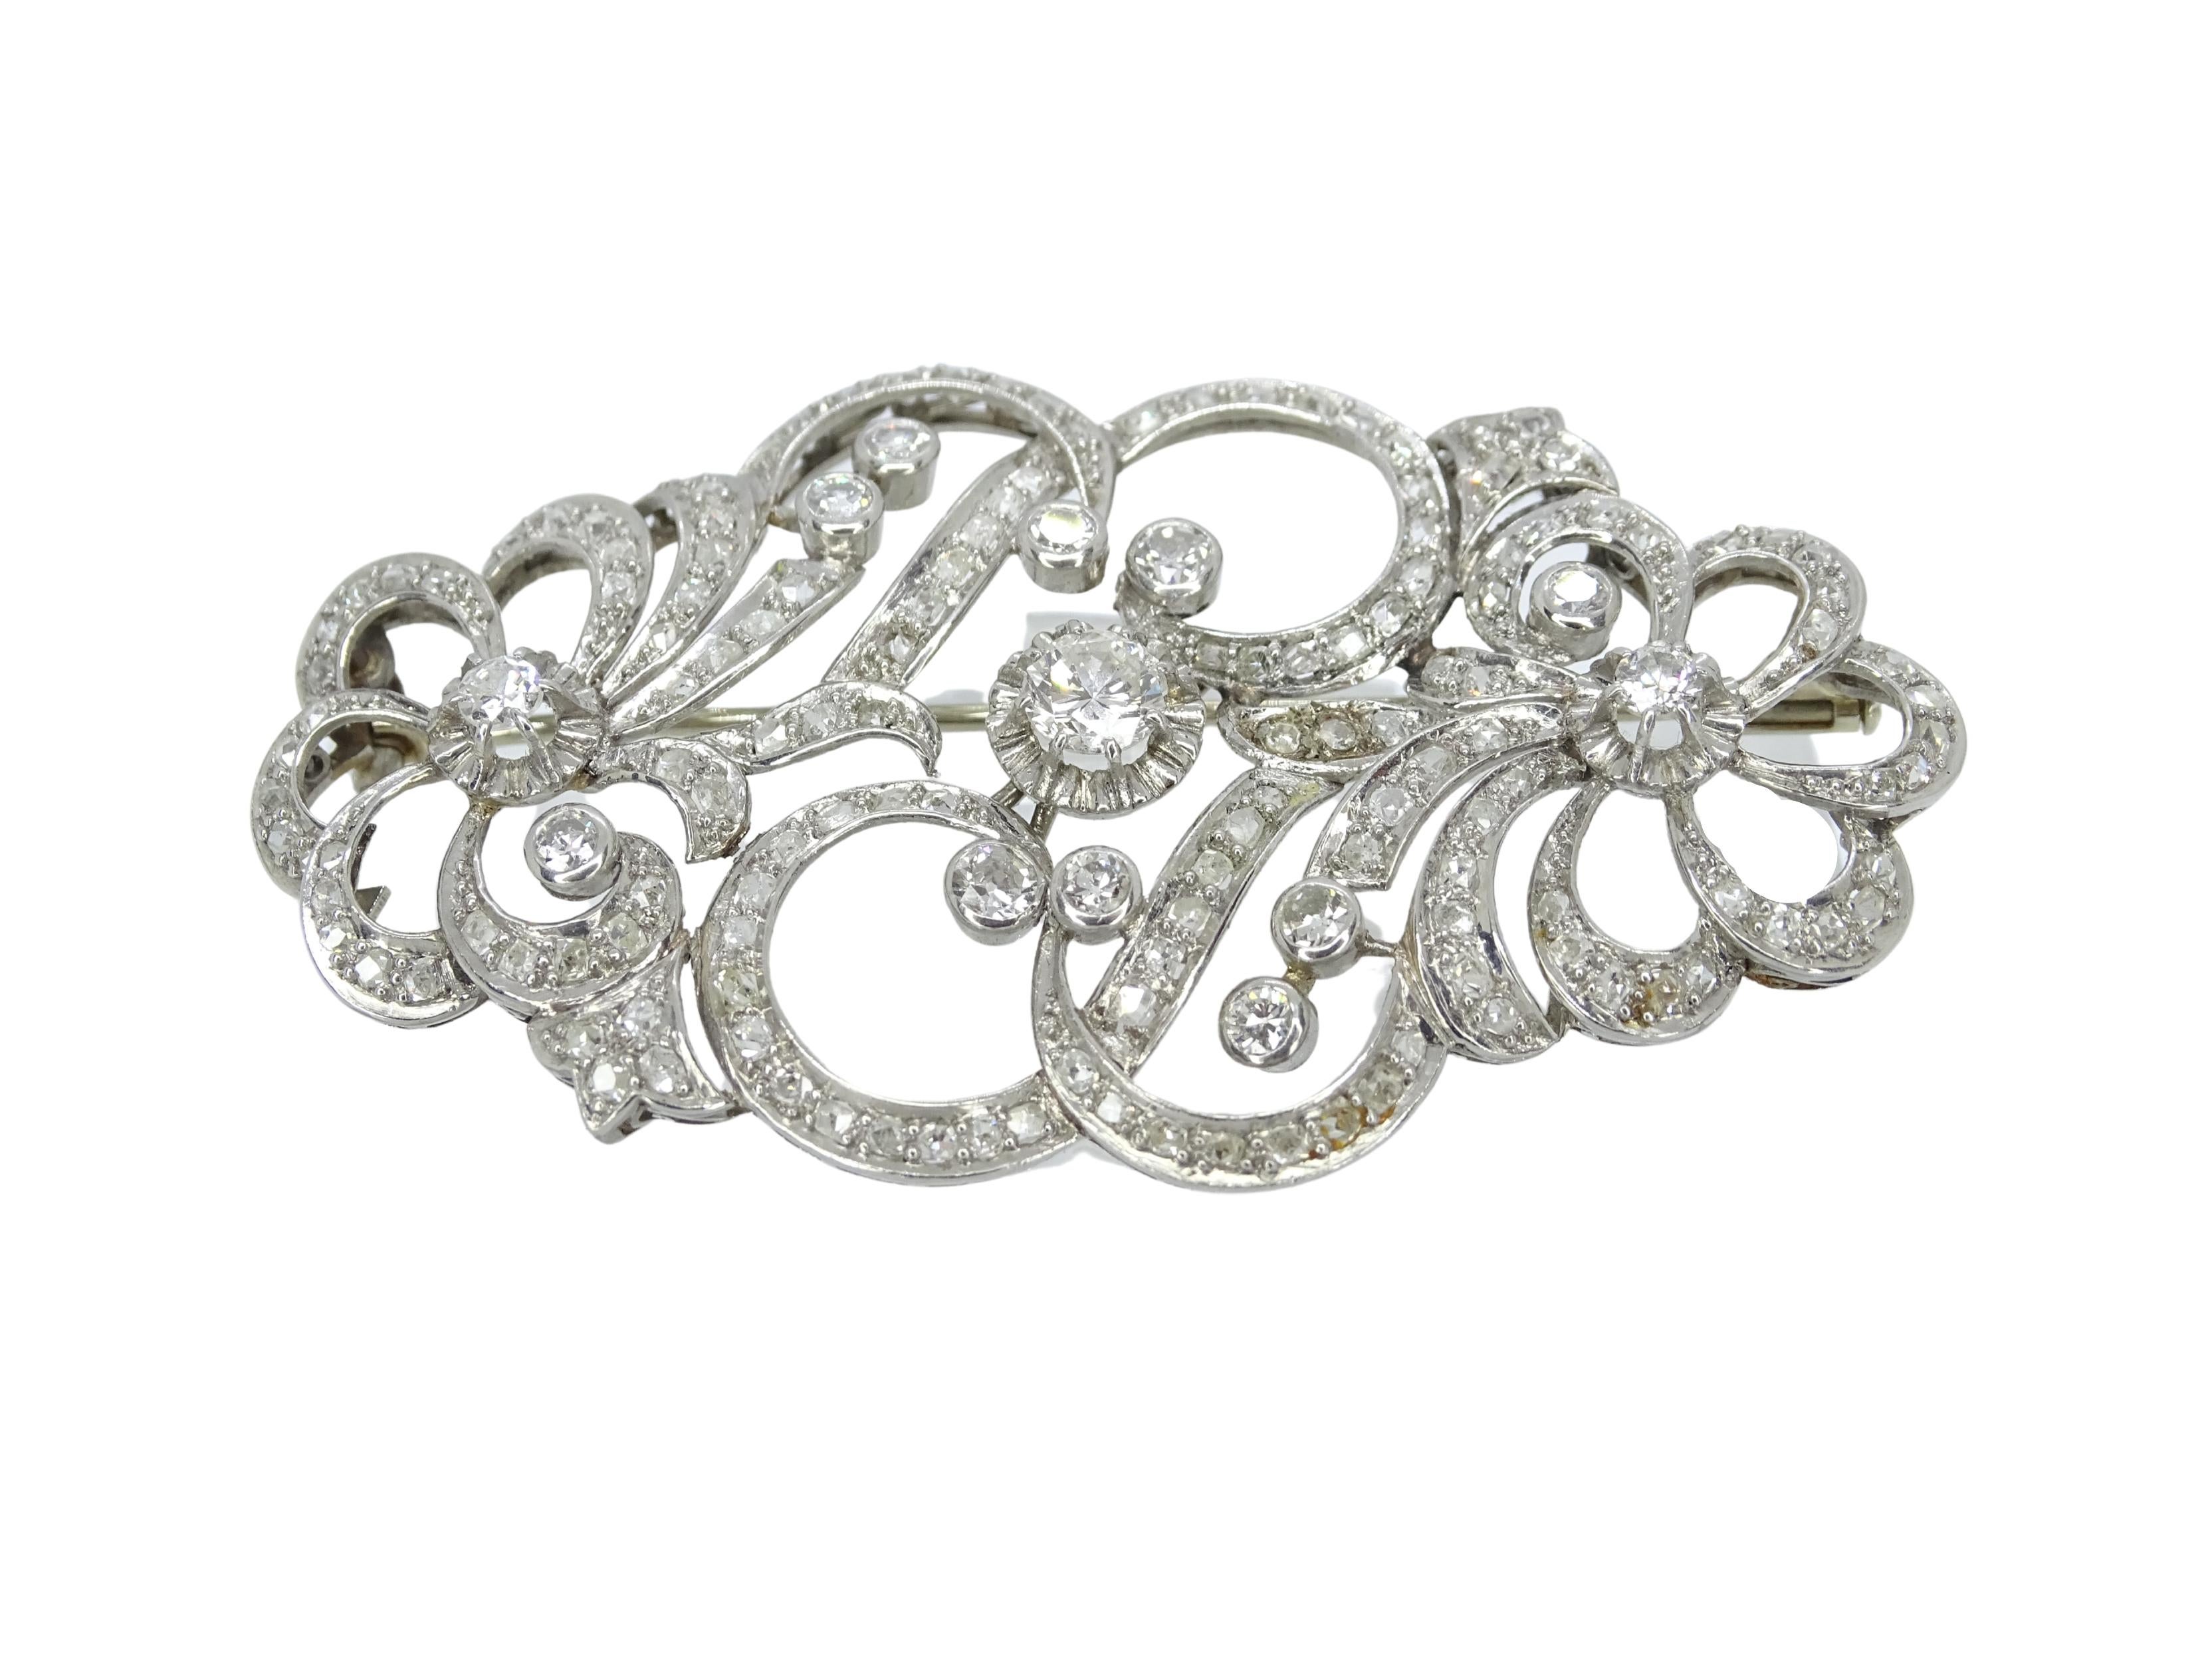 Brilliant Cut White gold and diamonds Art Nouveau Brooch , French jewell